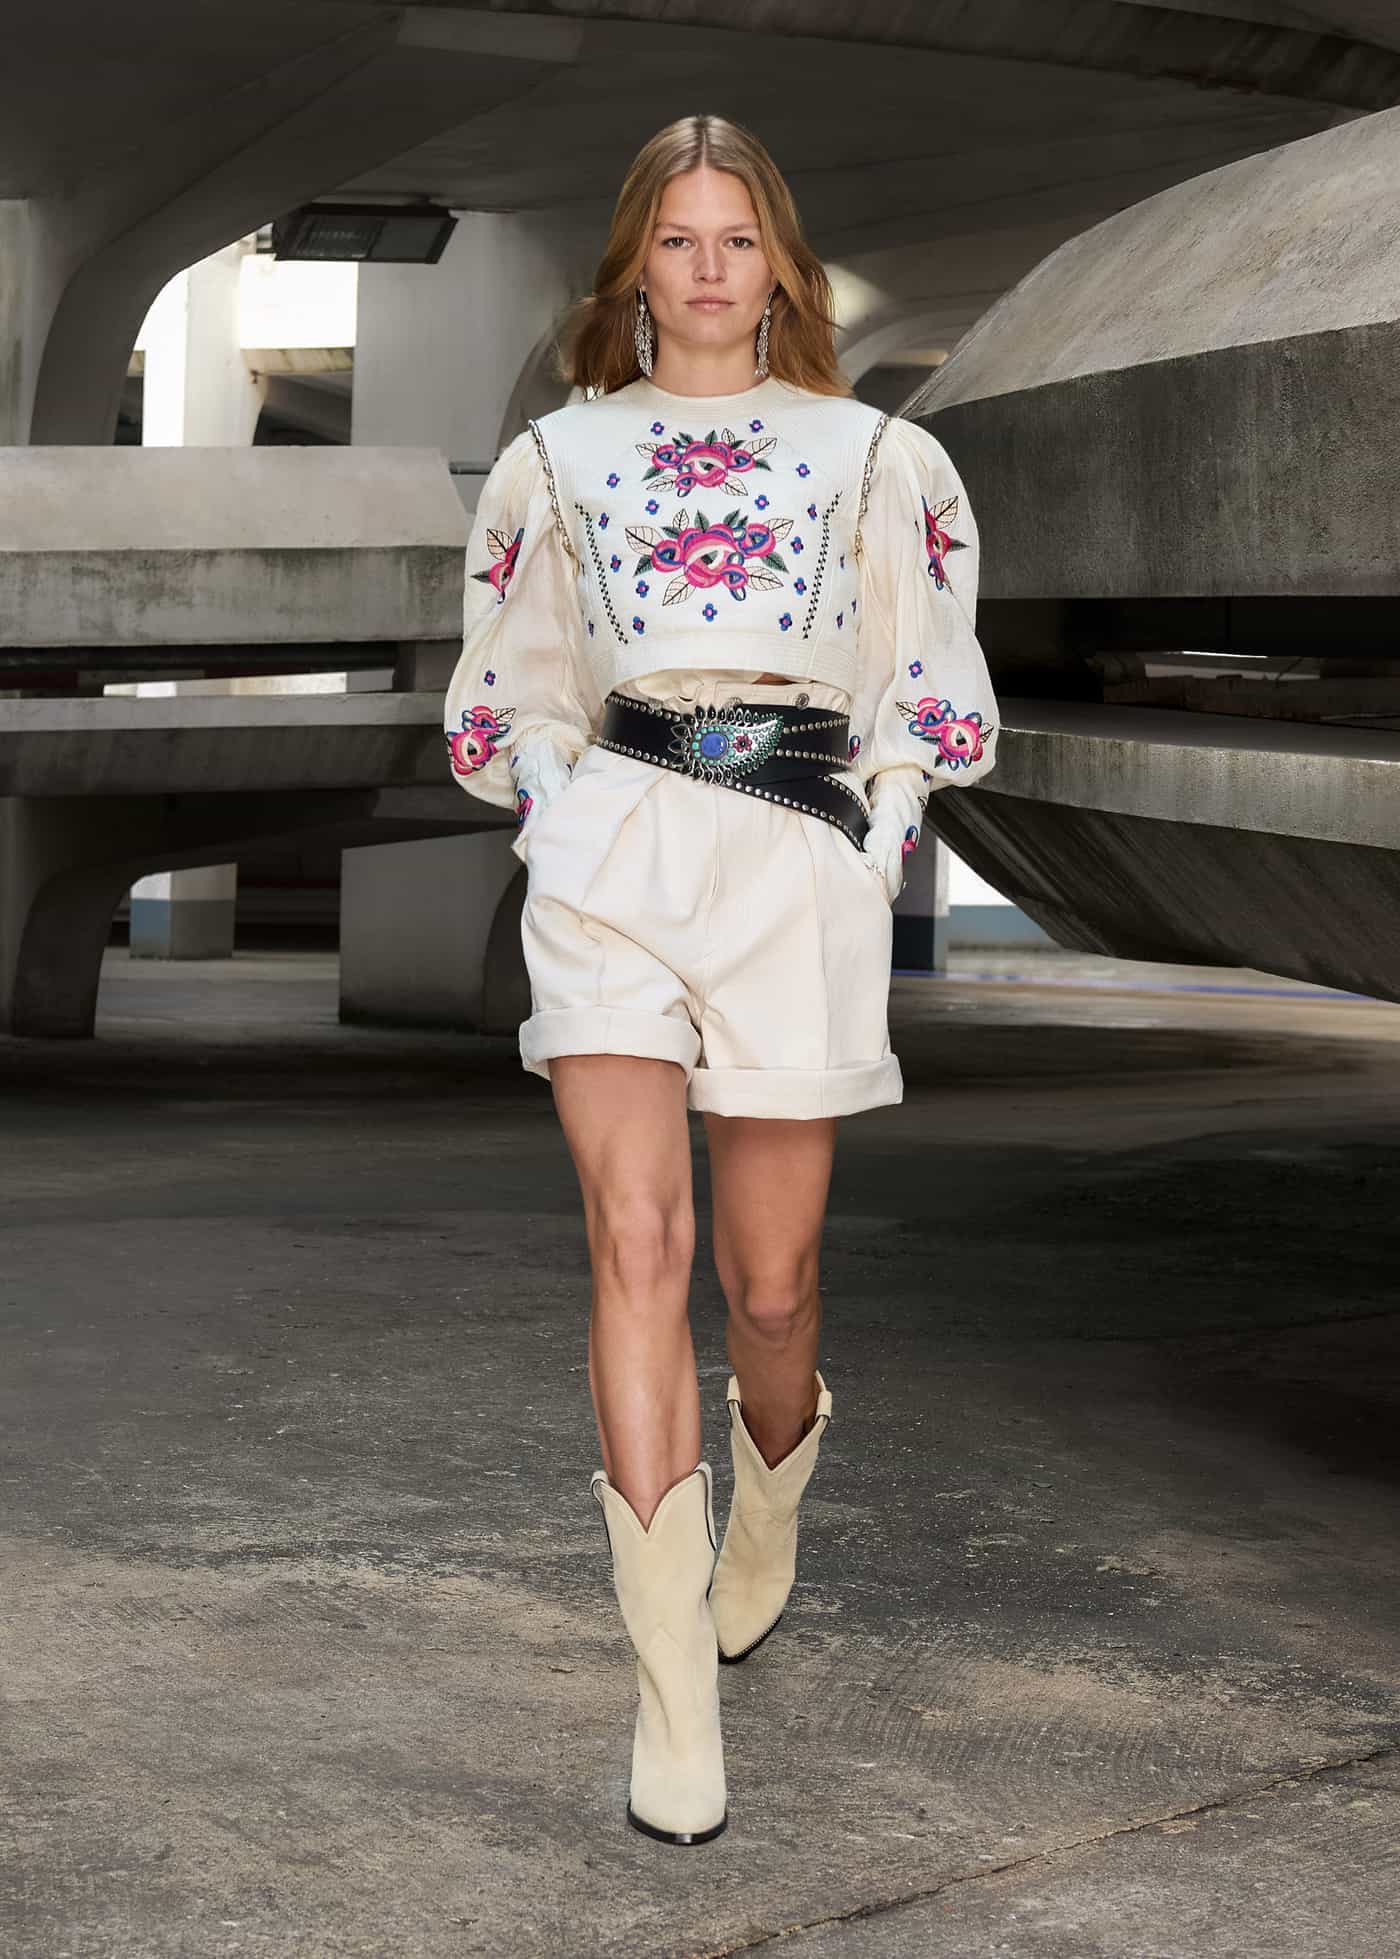 Ook Lounge Bekritiseren Isabel Marant Looks To Jimi And Janice For Fall '21